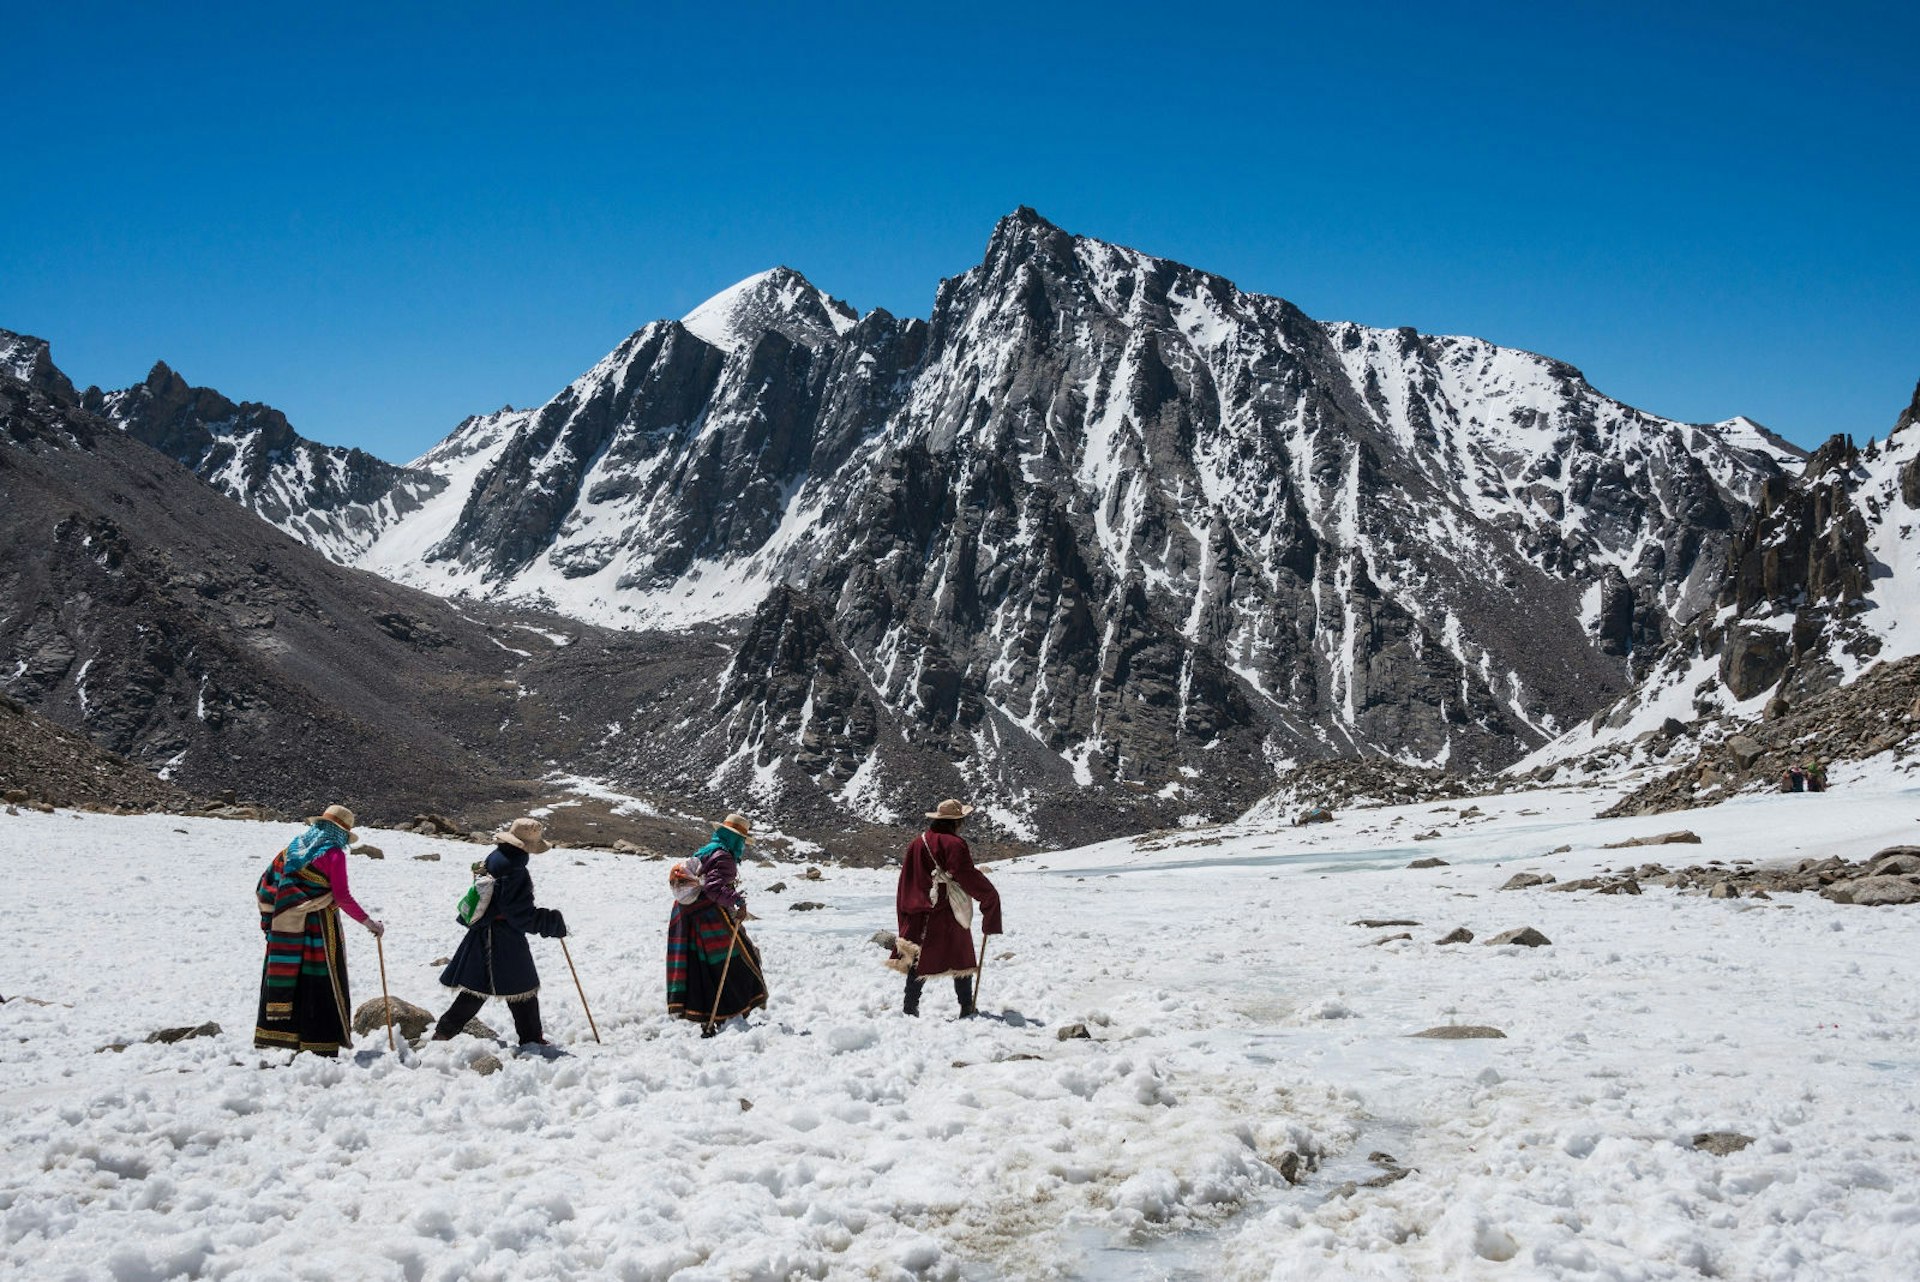 Four people dressed in heavy winter clothing walk through the snow with a snow-capped peak in the background and a clear blue sky.